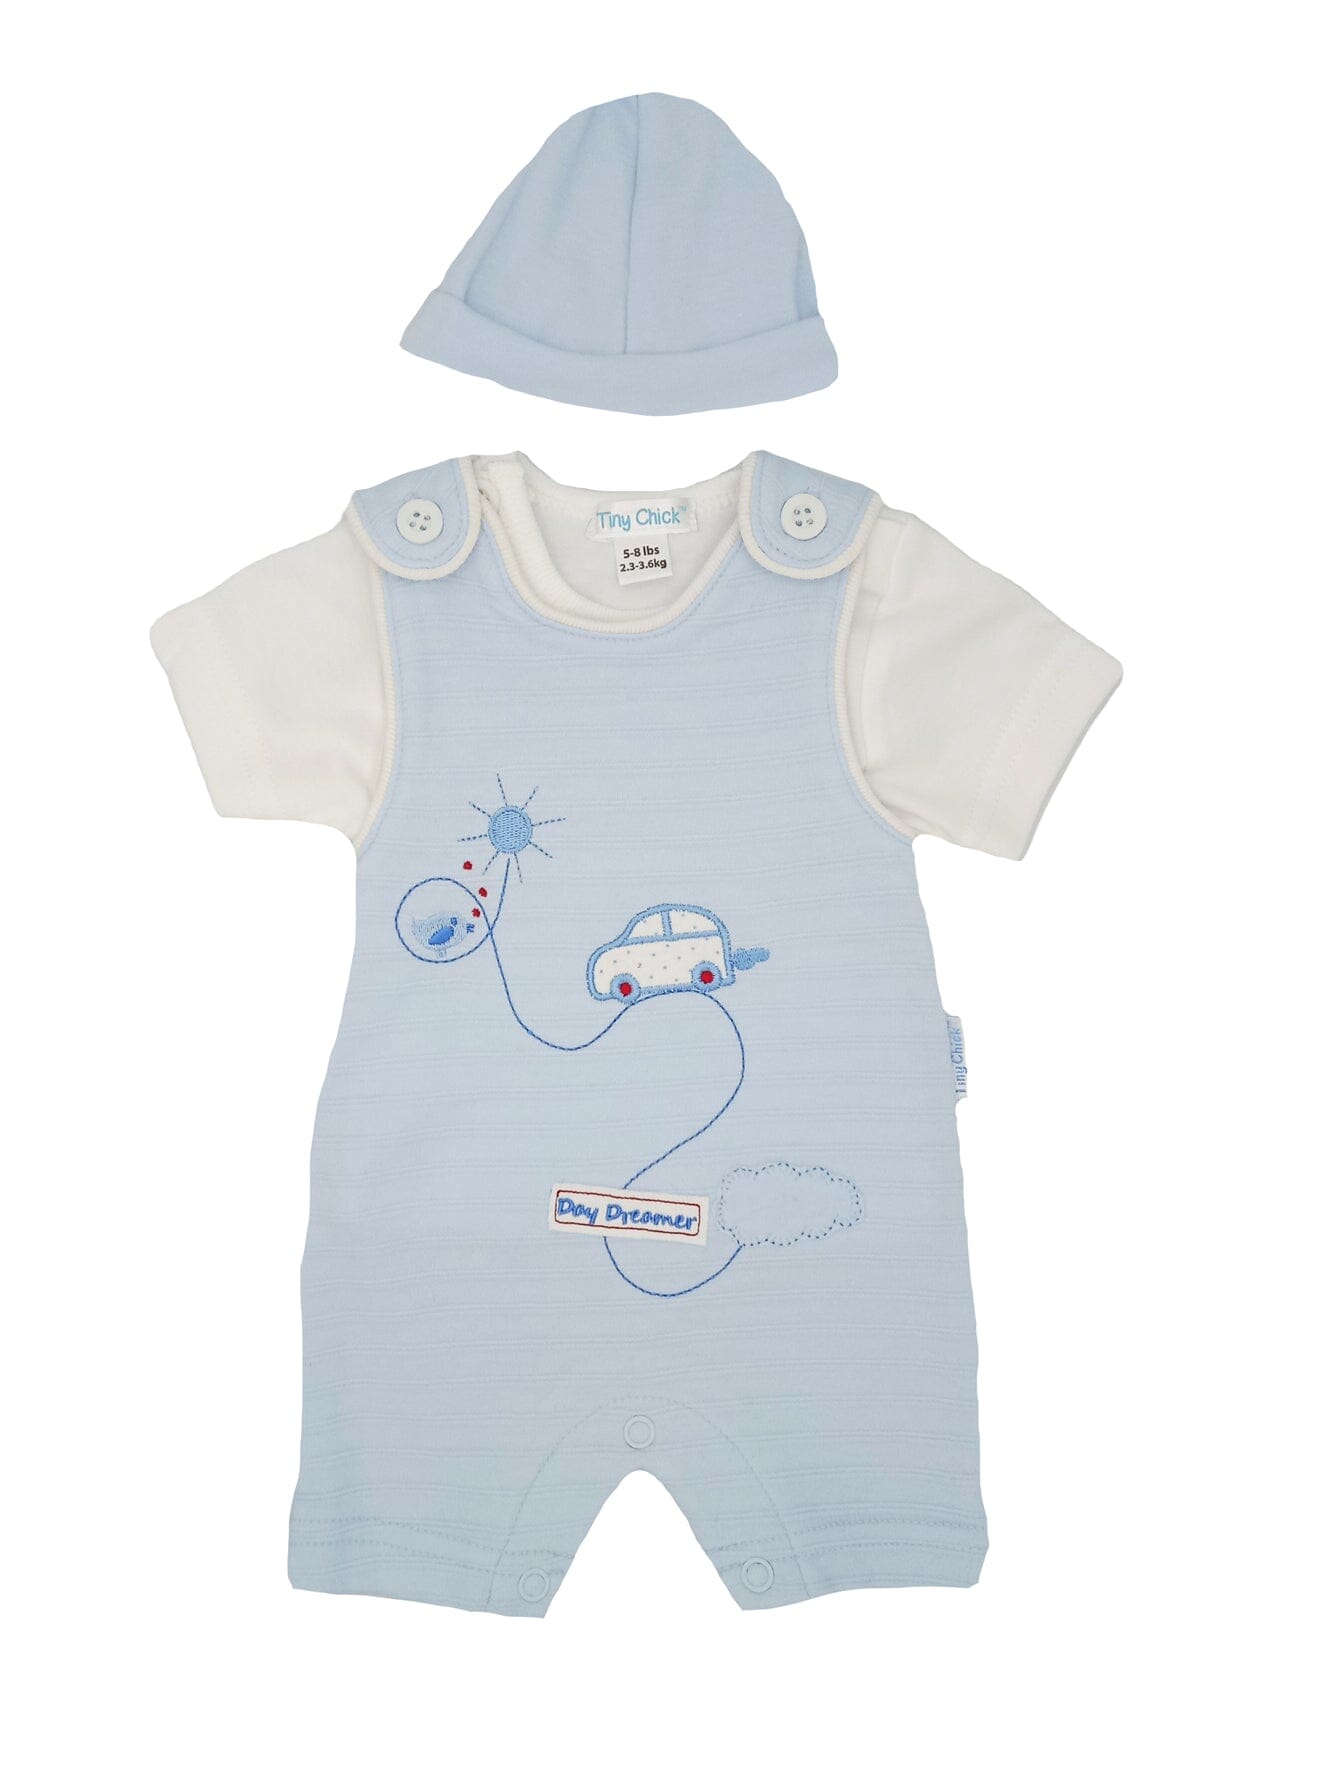 Daydreamer Set, Blue: Dungarees, Top & Hat Outift Tiny Chick 